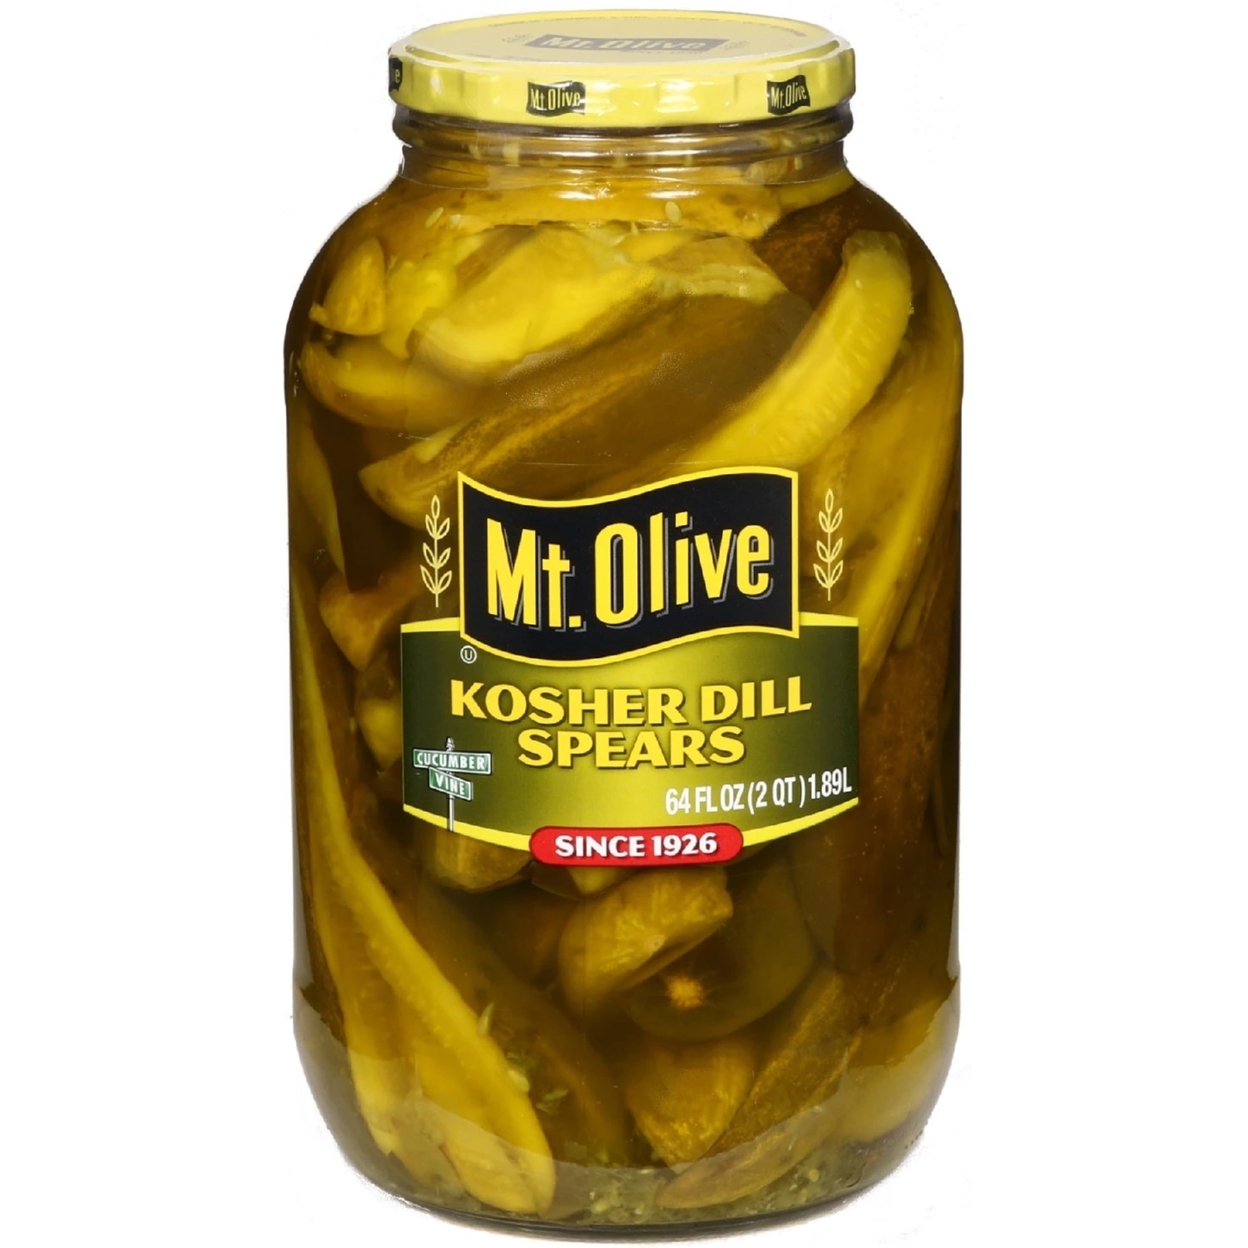 Mt Olive Fresh Kosher Dill Spears (64 Ounce)